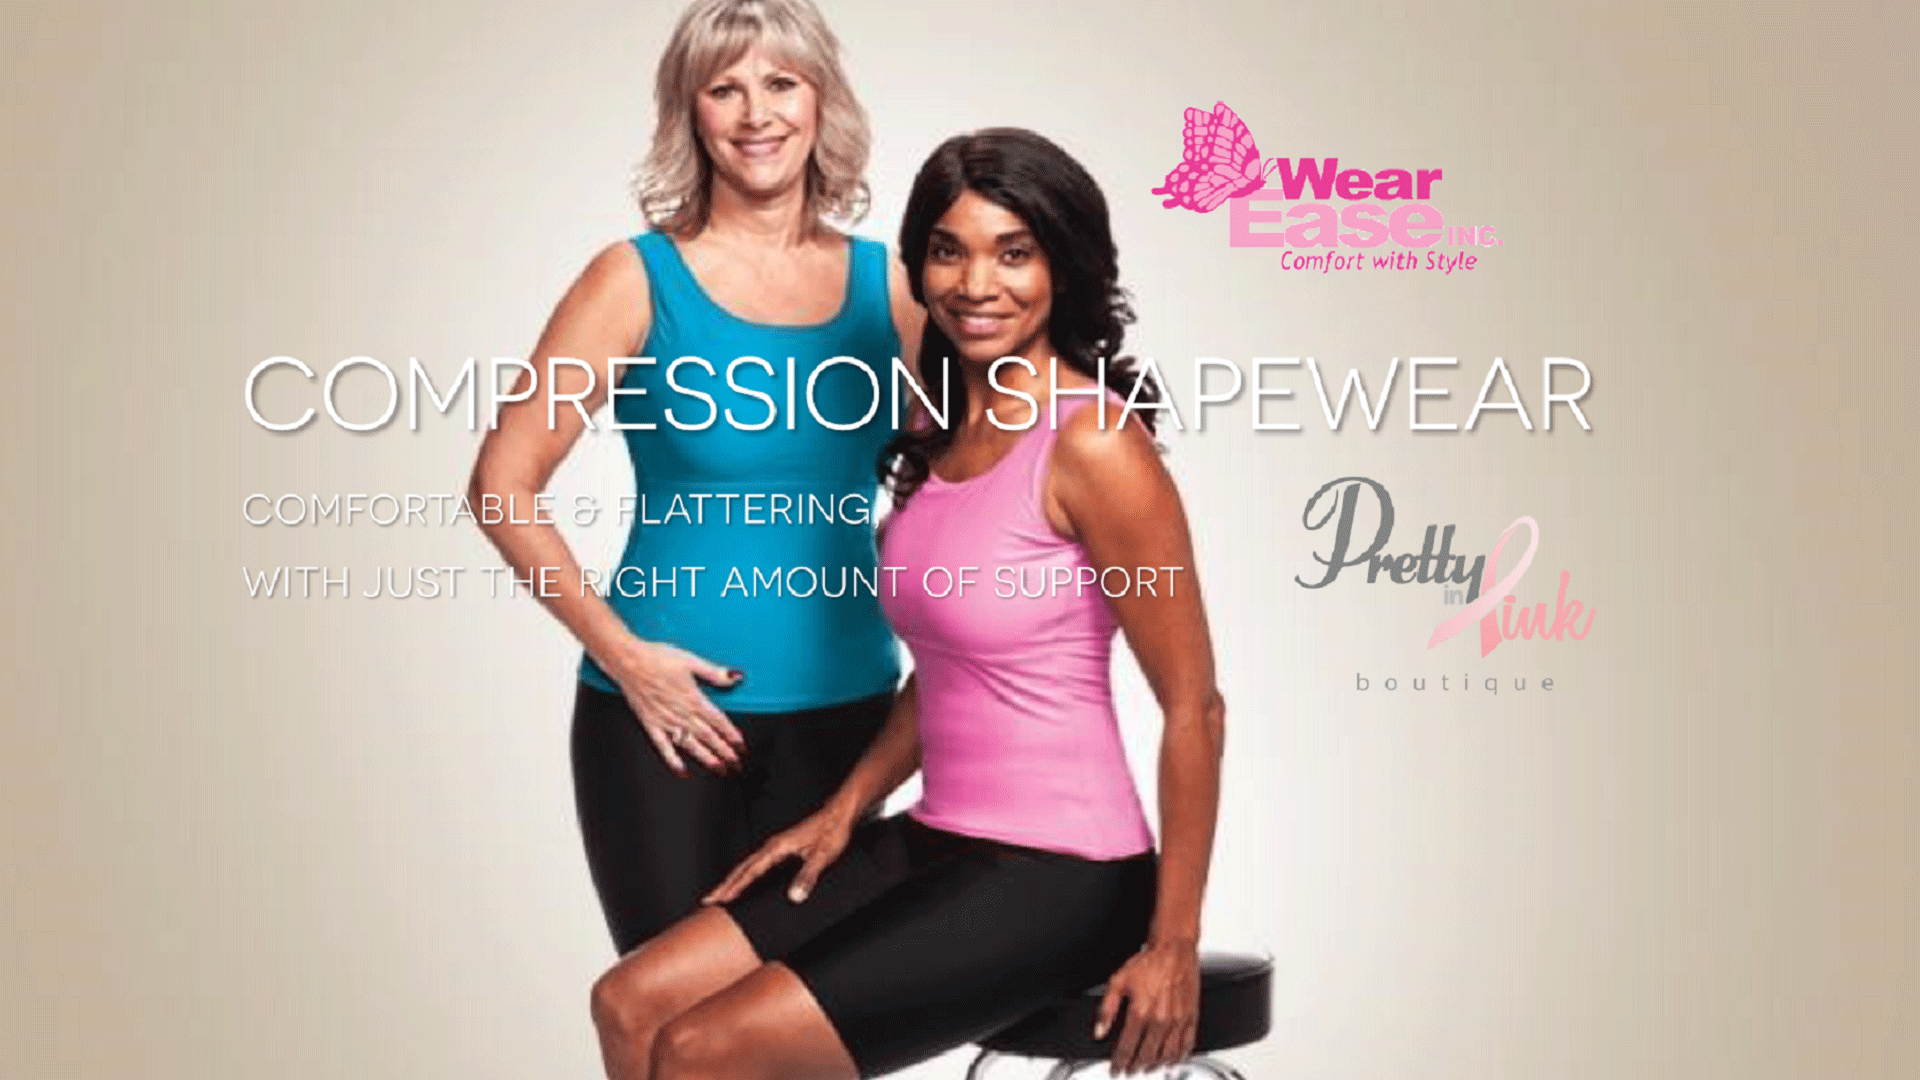 Wear Ease Compression Shapewear - Pretty in Pink Boutique